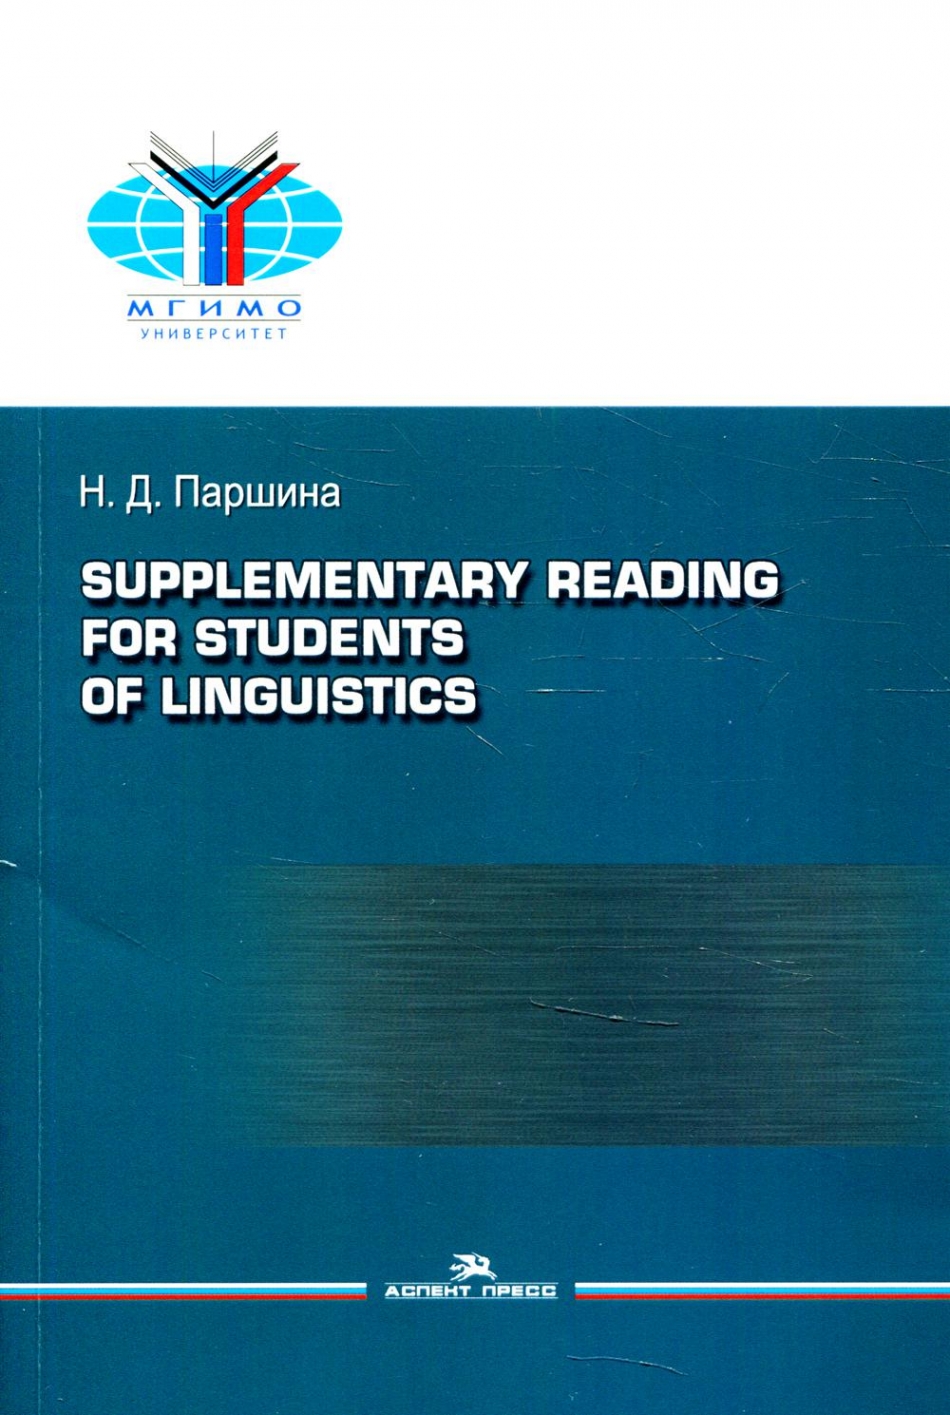  . .      - = Supplementary reading for students of linguistics:  